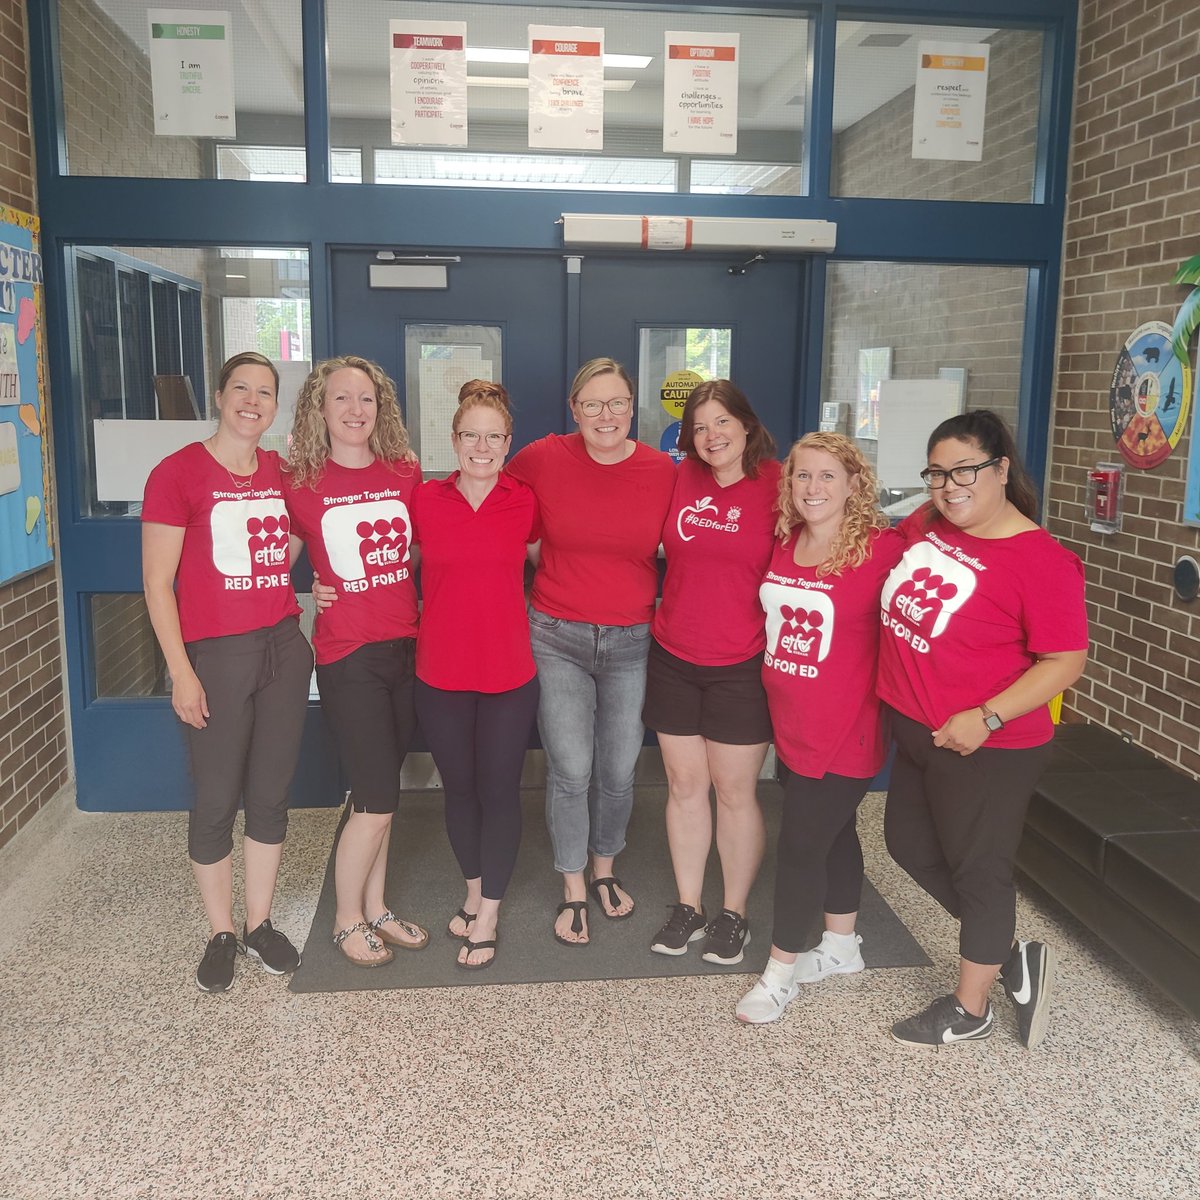 The staff at Vincent Massey stand in solidarity. @ETFOcb @ETFOeducators #OurSchoolsOurFuture